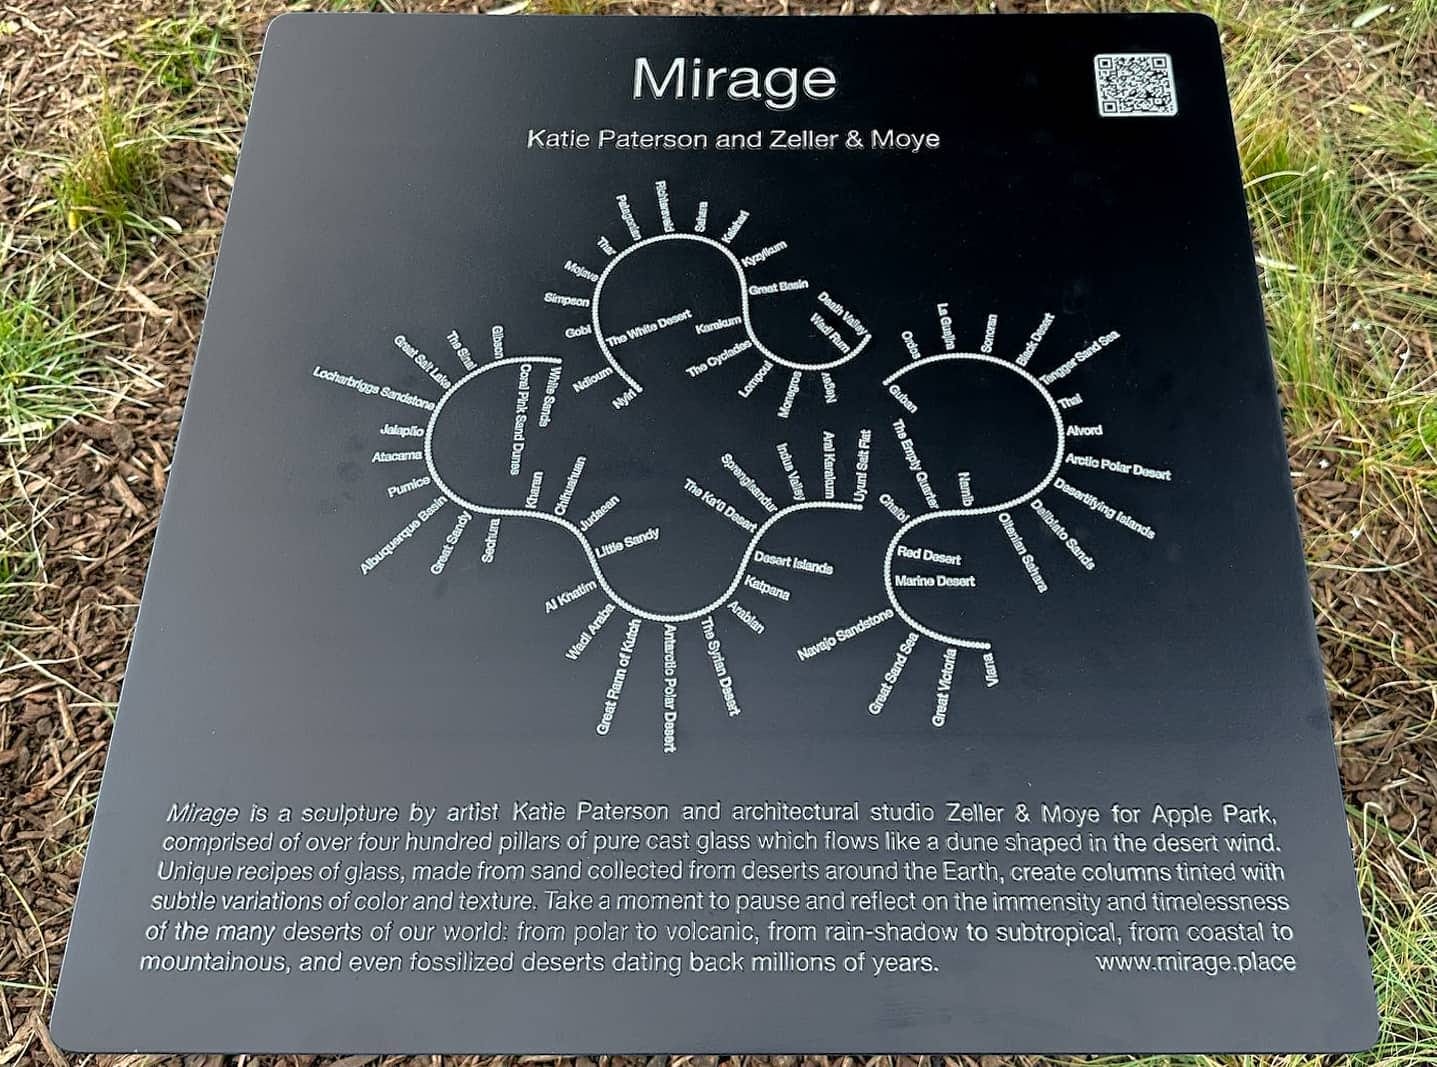 Wayfinding signage for Mirage at Apple Park Visitor Center. A map of the sculpture is represented above the description.